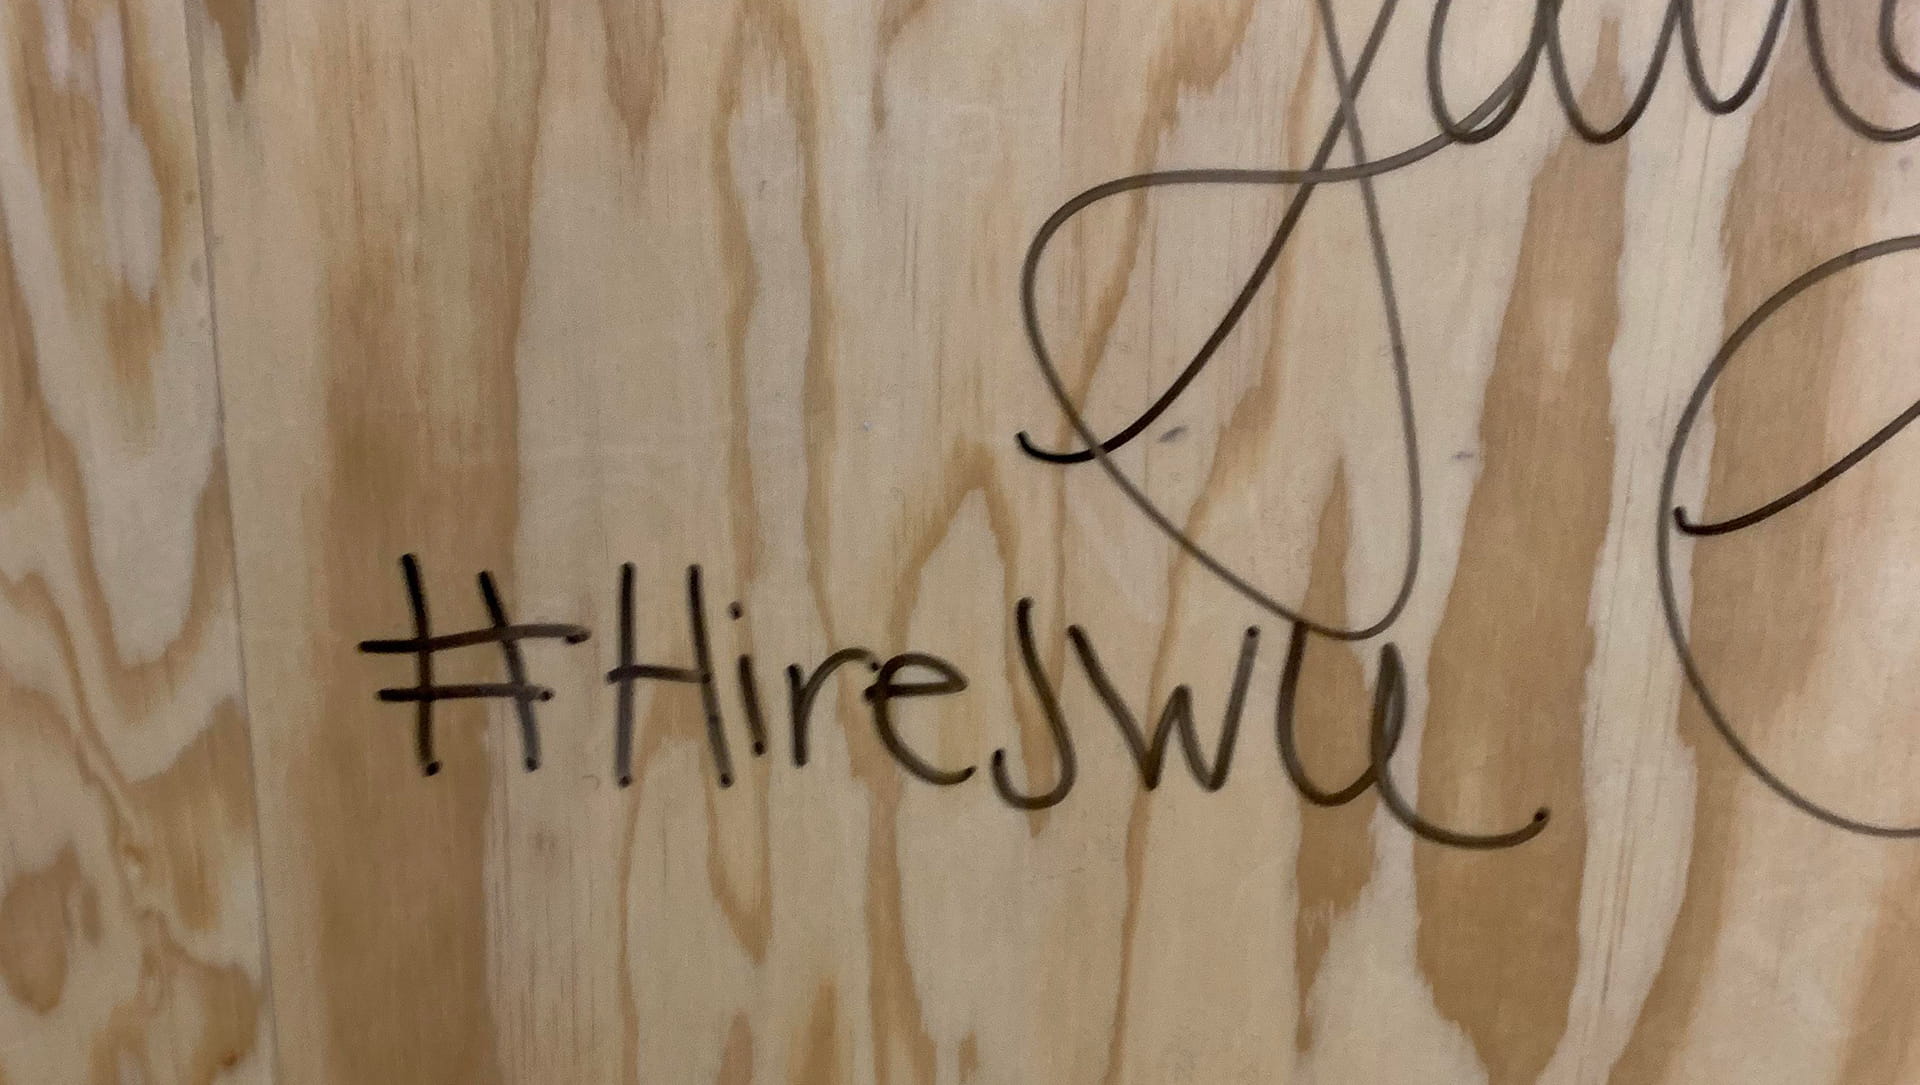 STUDENTS LEFT A SUBTLE HINT (#HireJWU) ON FACEBOOK'S "WHATS ON YOUR MIND?" WALL.